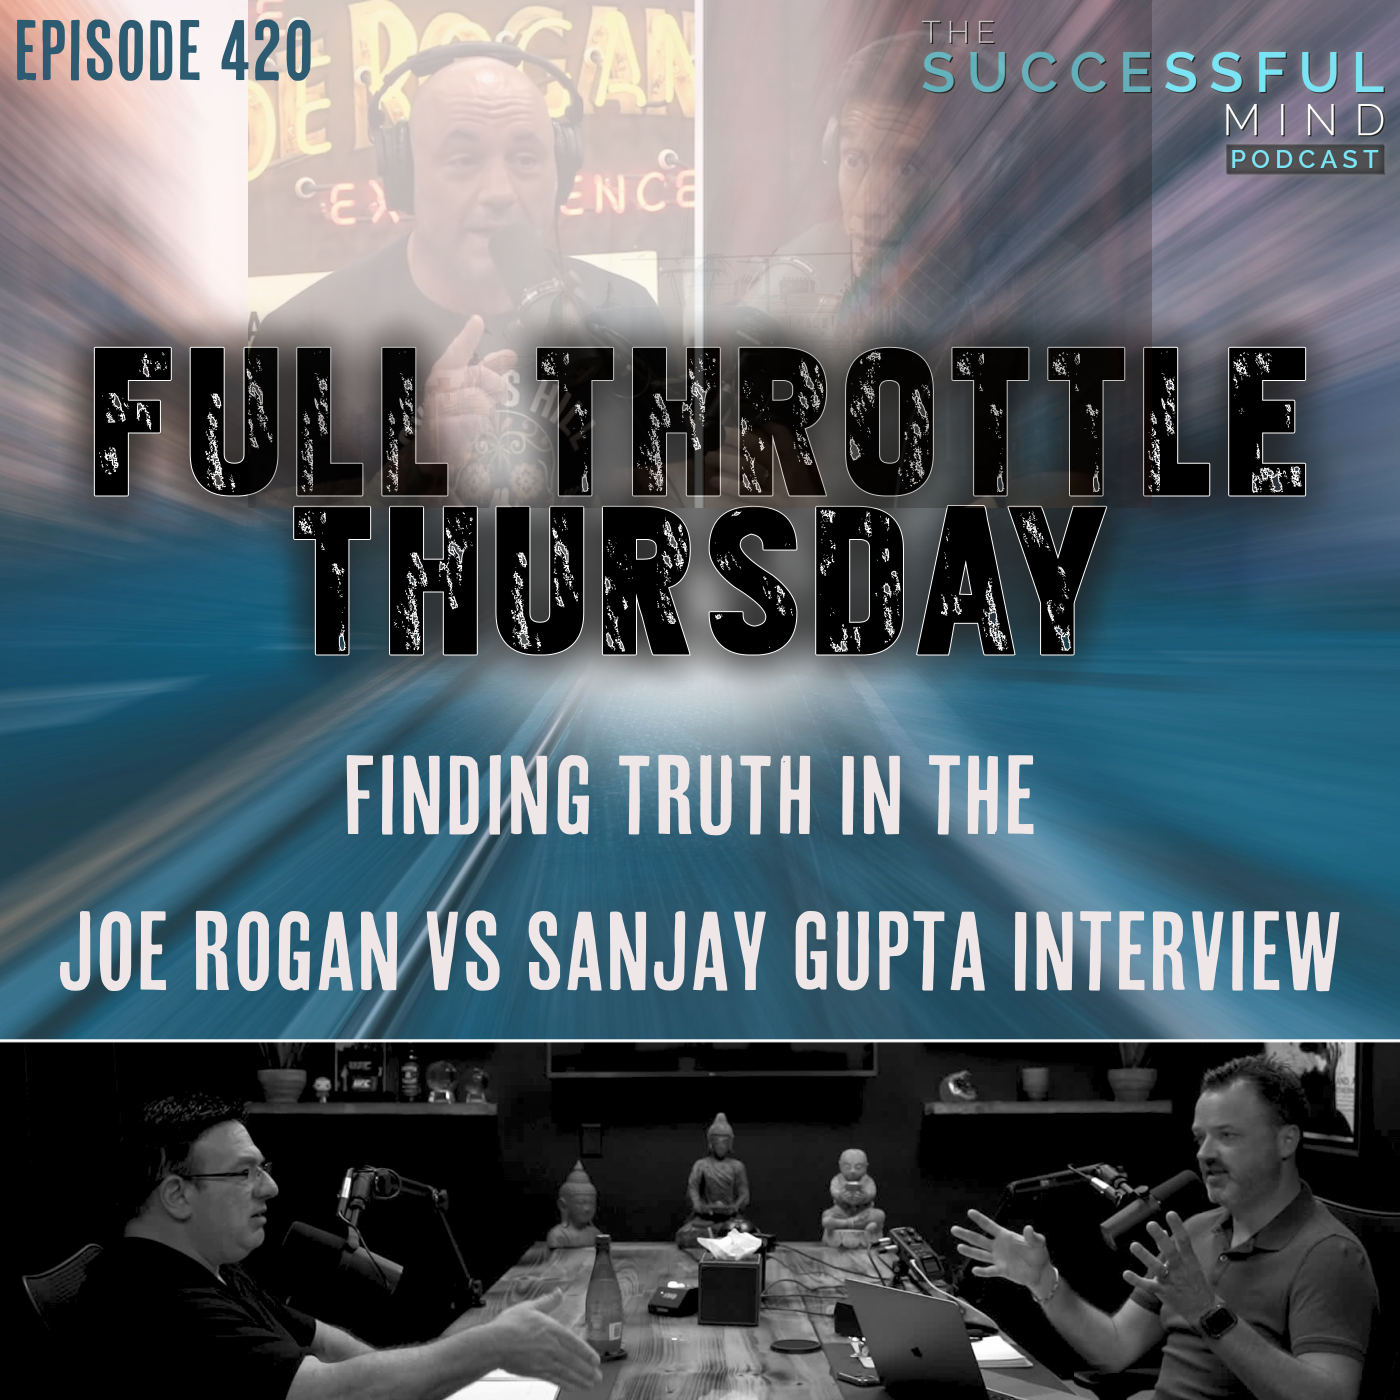 The Successful Mind Podcast - Full Throttle Thursday - Finding TRUTH in the Rogan V Gupta Interview